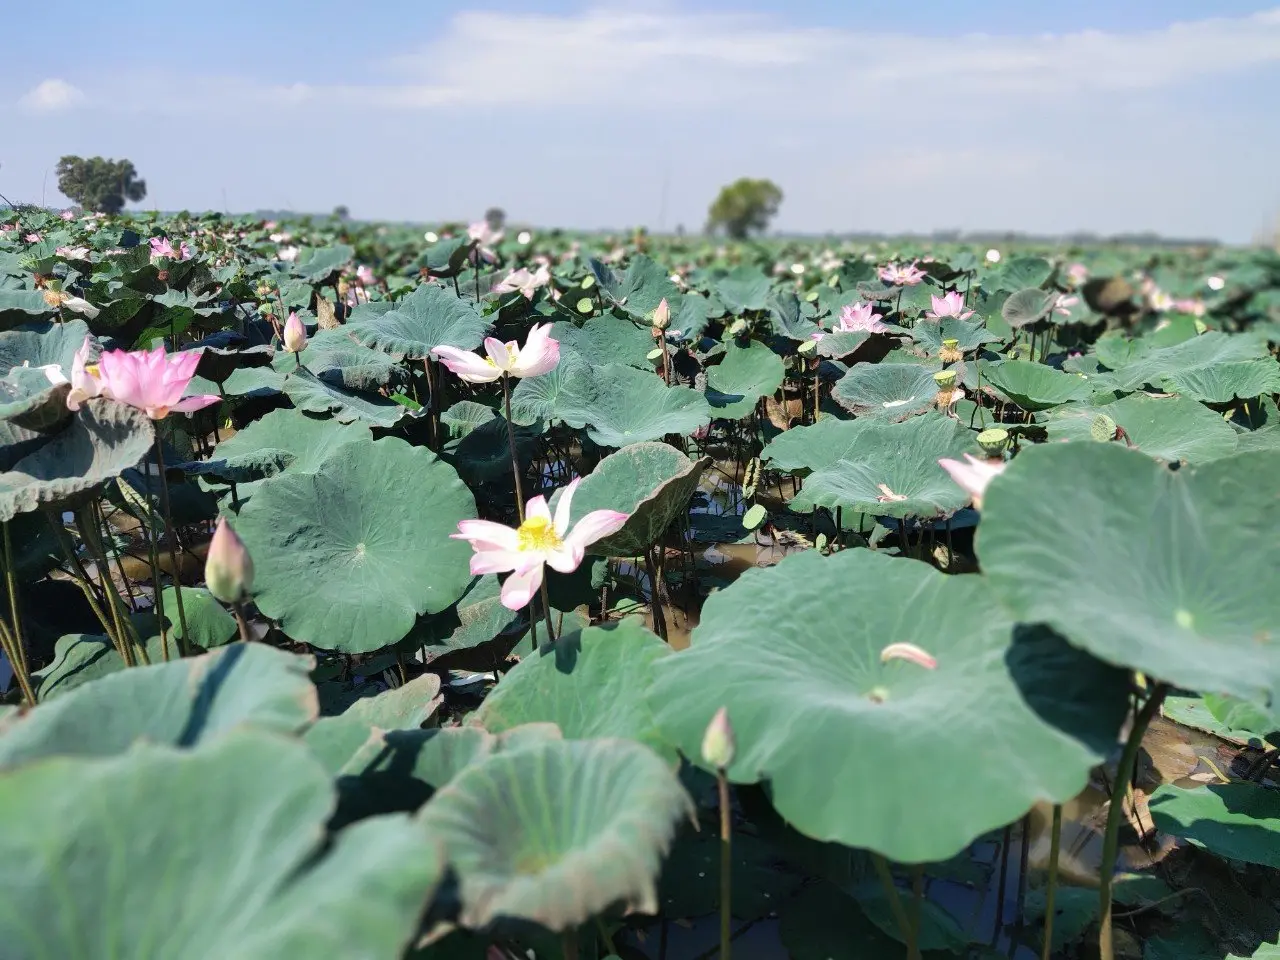 A lotus farm in Dong Thap Province, Viet Nam